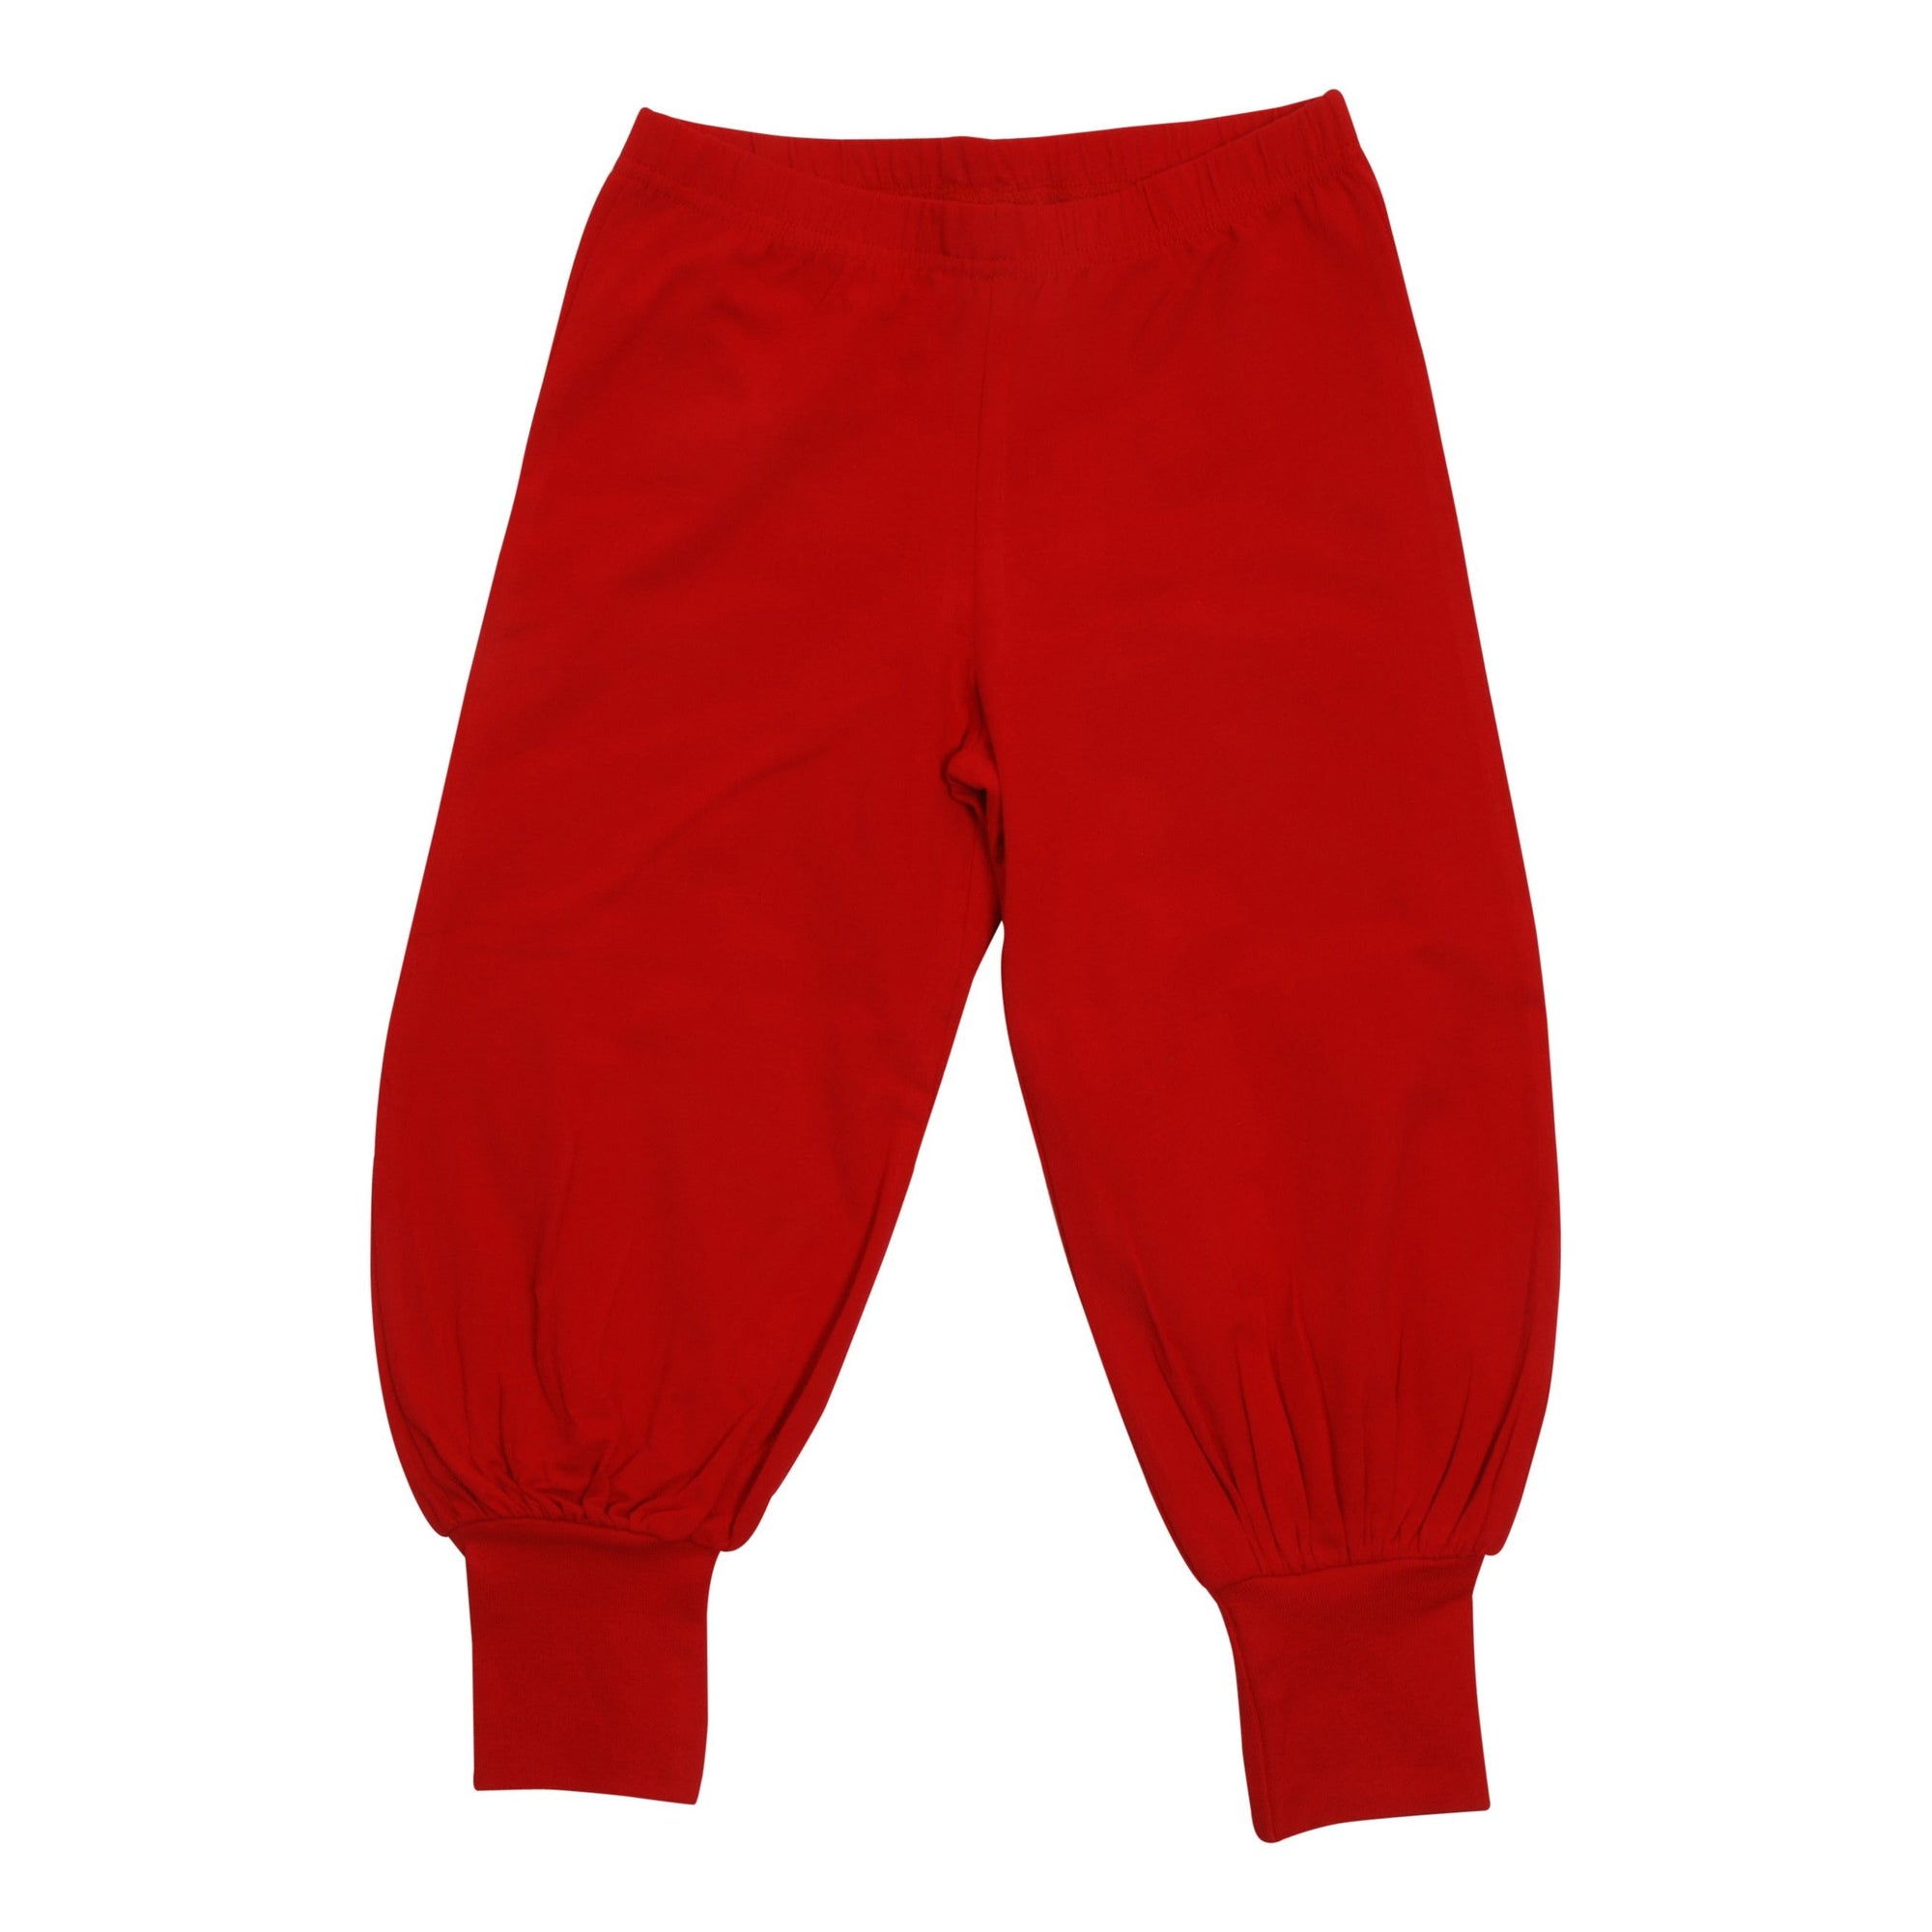 Tango Red Baggy Pants - 2 Left Size 10-12 & 12-14 years-More Than A Fling-Modern Rascals